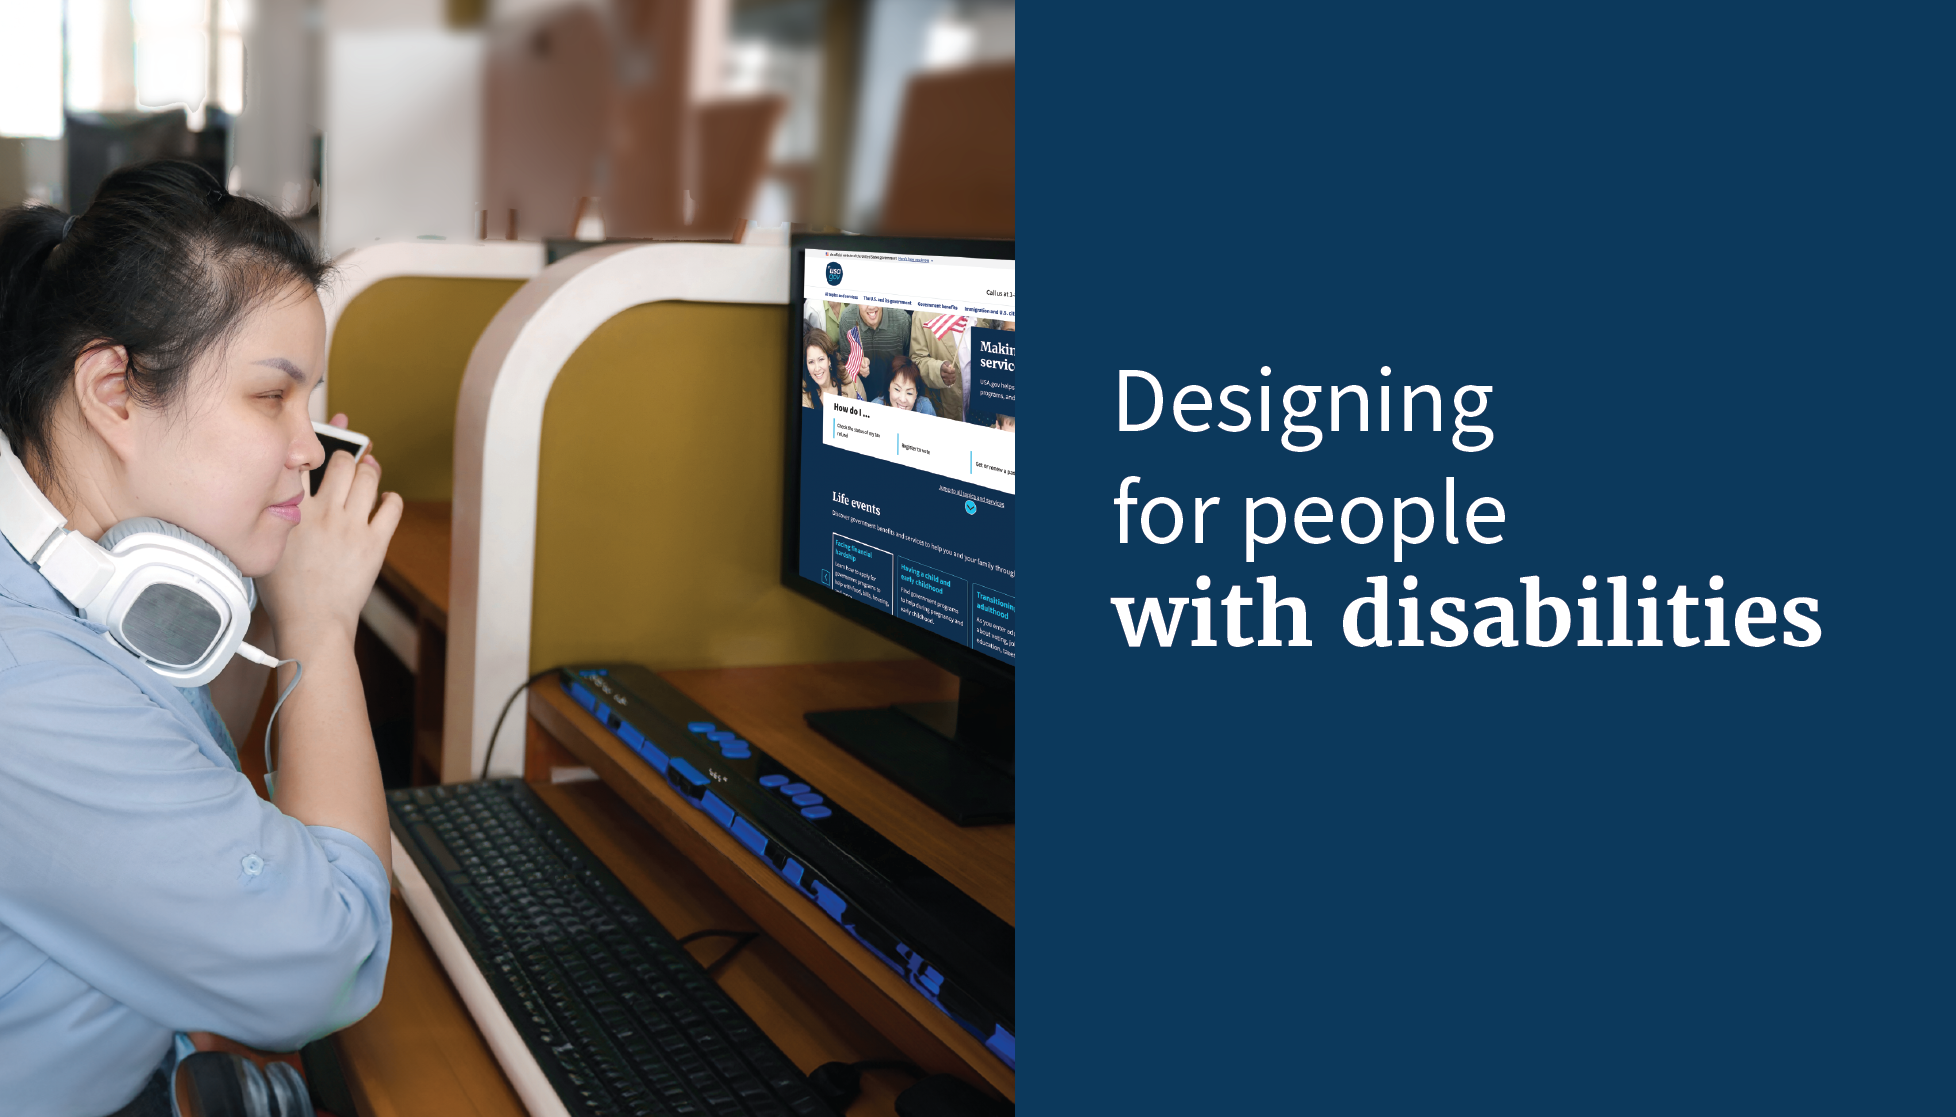 Designing for people with disabilities